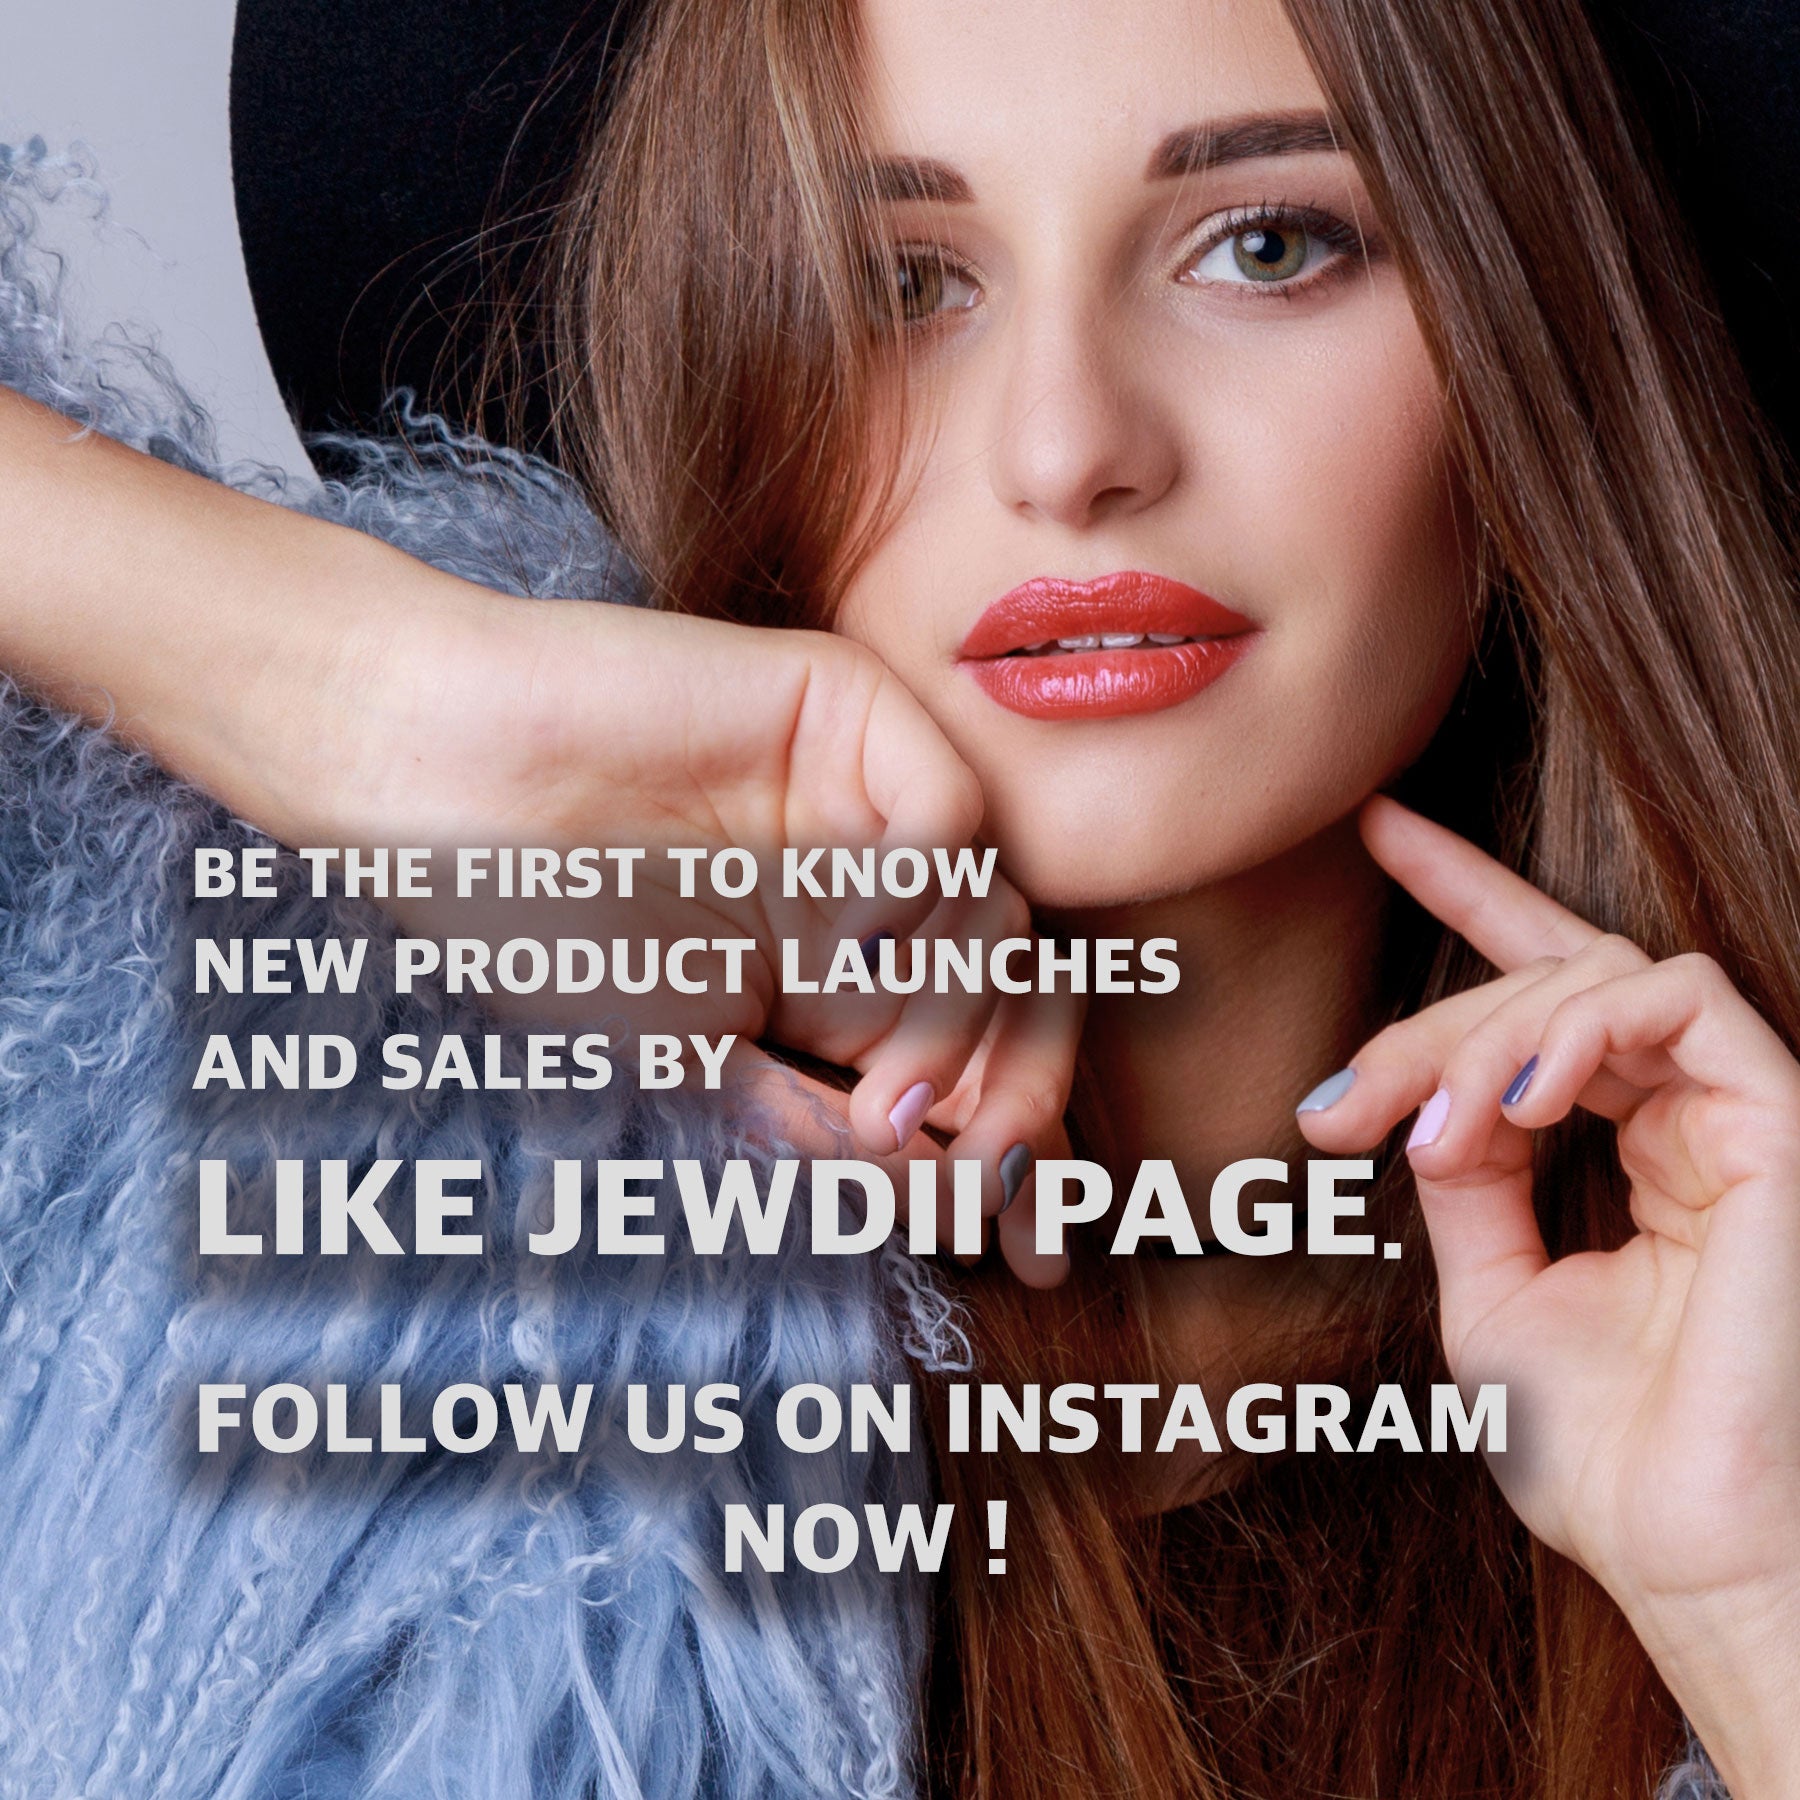 Get exclusive discounts and promotions when you like our page and following us on Instagram!